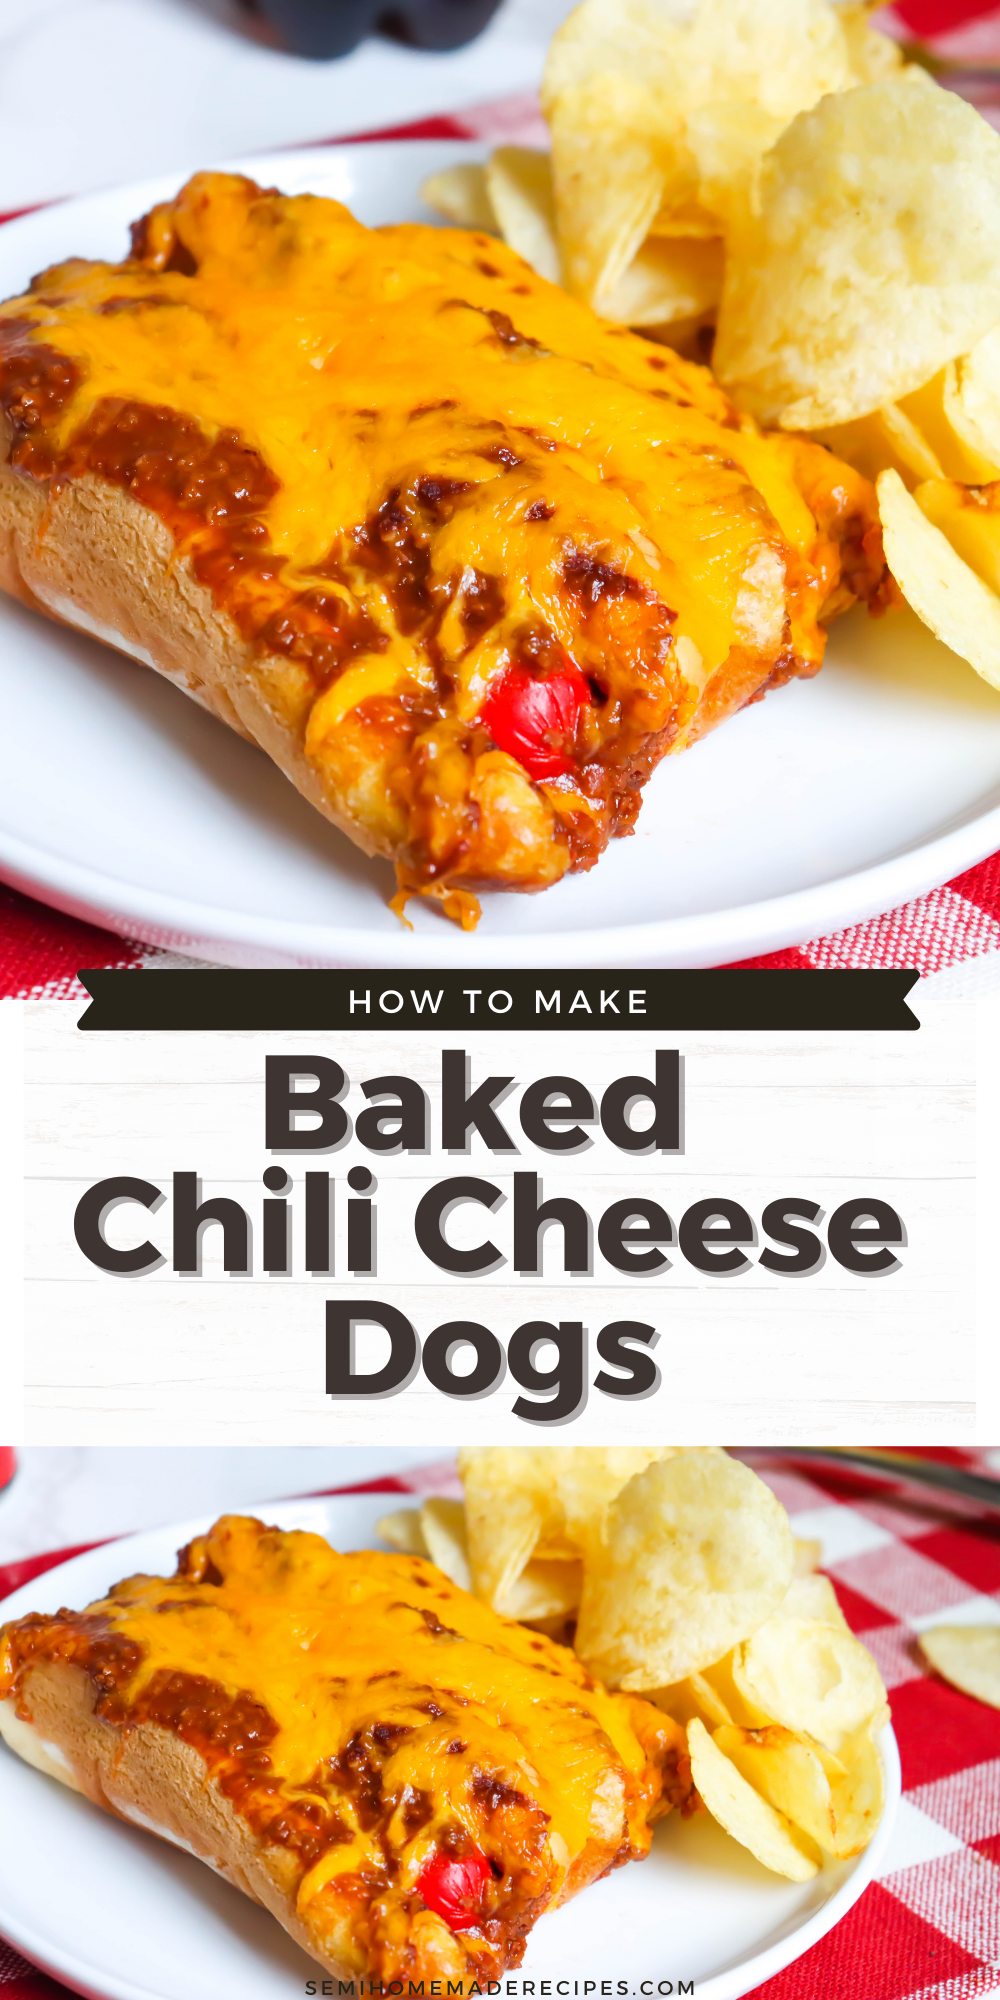 Cheesy, Chili covered Hot Dogs that are baked in the oven! These Baked Chili Cheese Dogs are delicious and so easy to make!